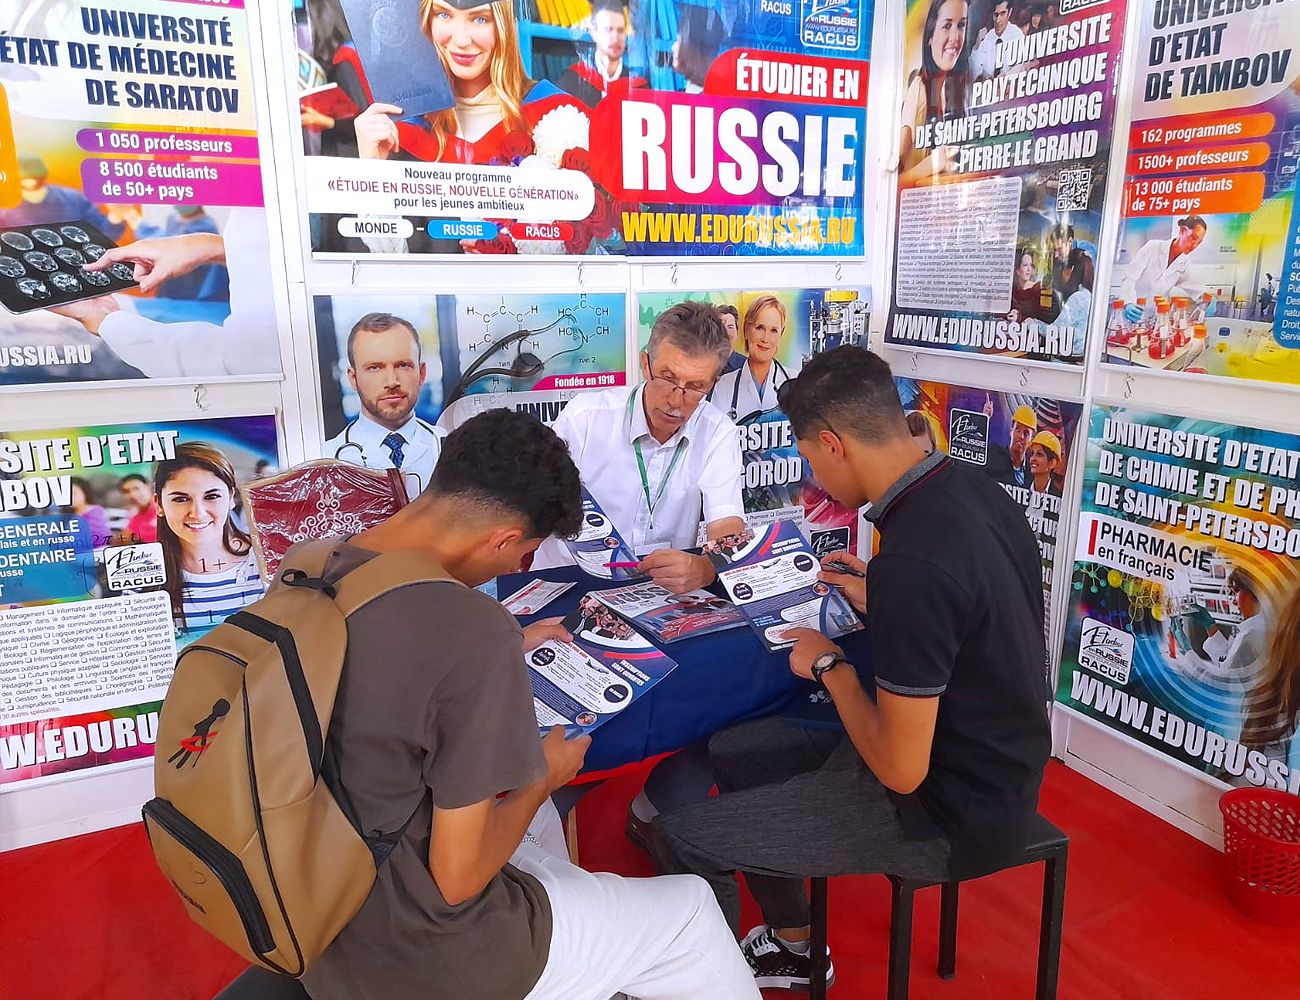 We would like to thank the organizers of the exhibition and all the guests for their interest and active life position. Studying in Russia is an important step for the ambitious people who dream of building a life on their own terms.